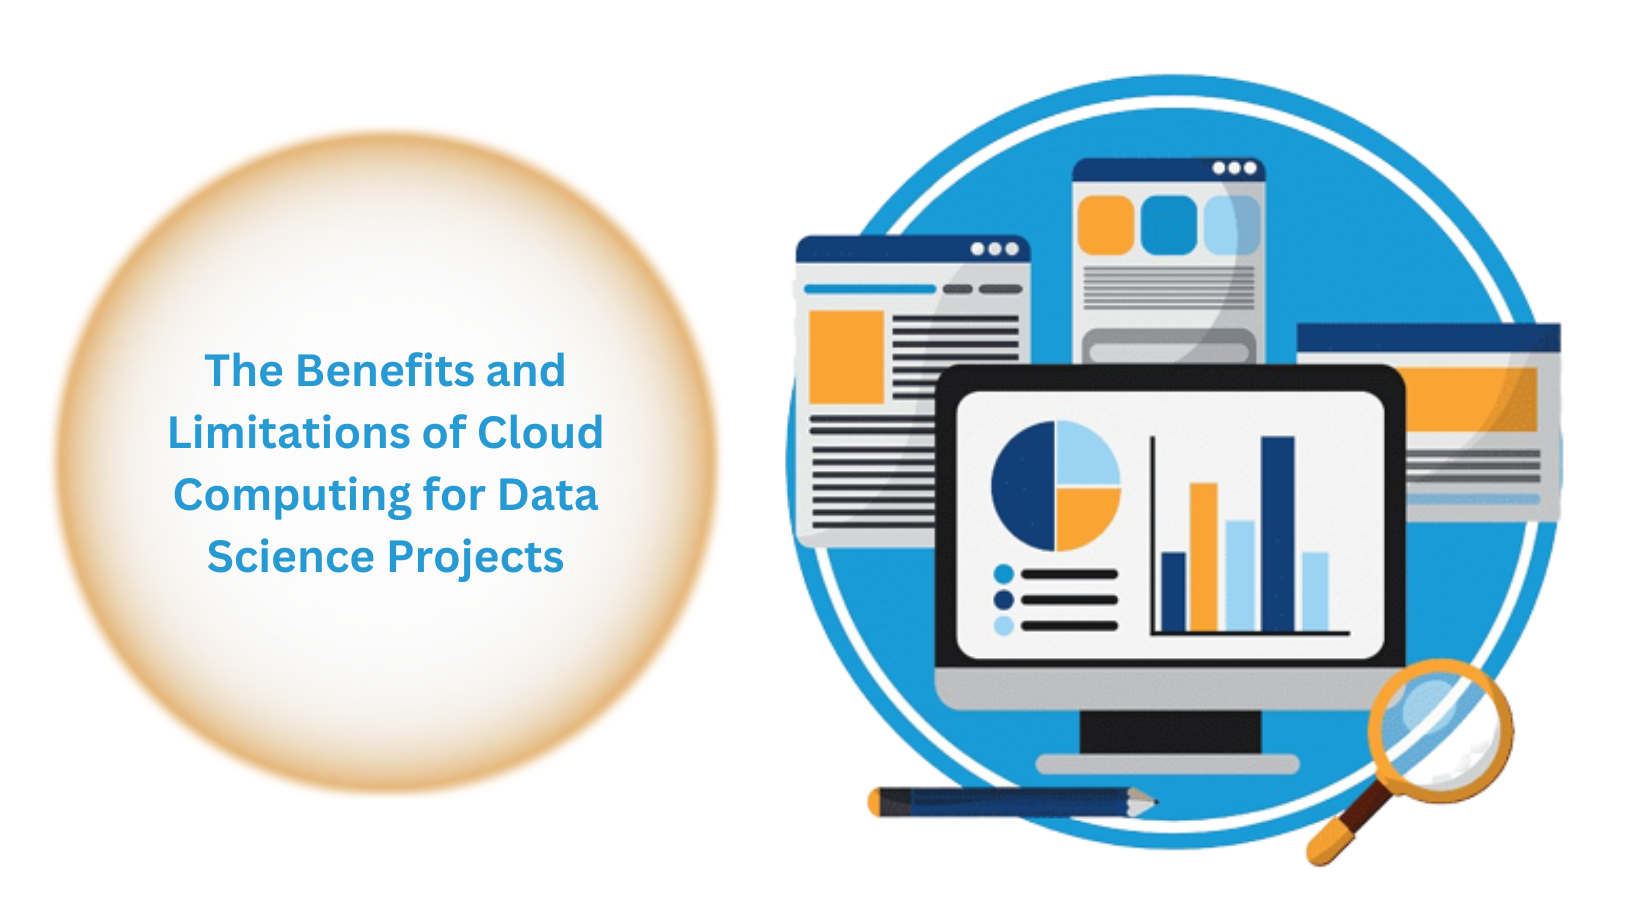 The Benefits and Limitations of Cloud Computing for Data Science Projects